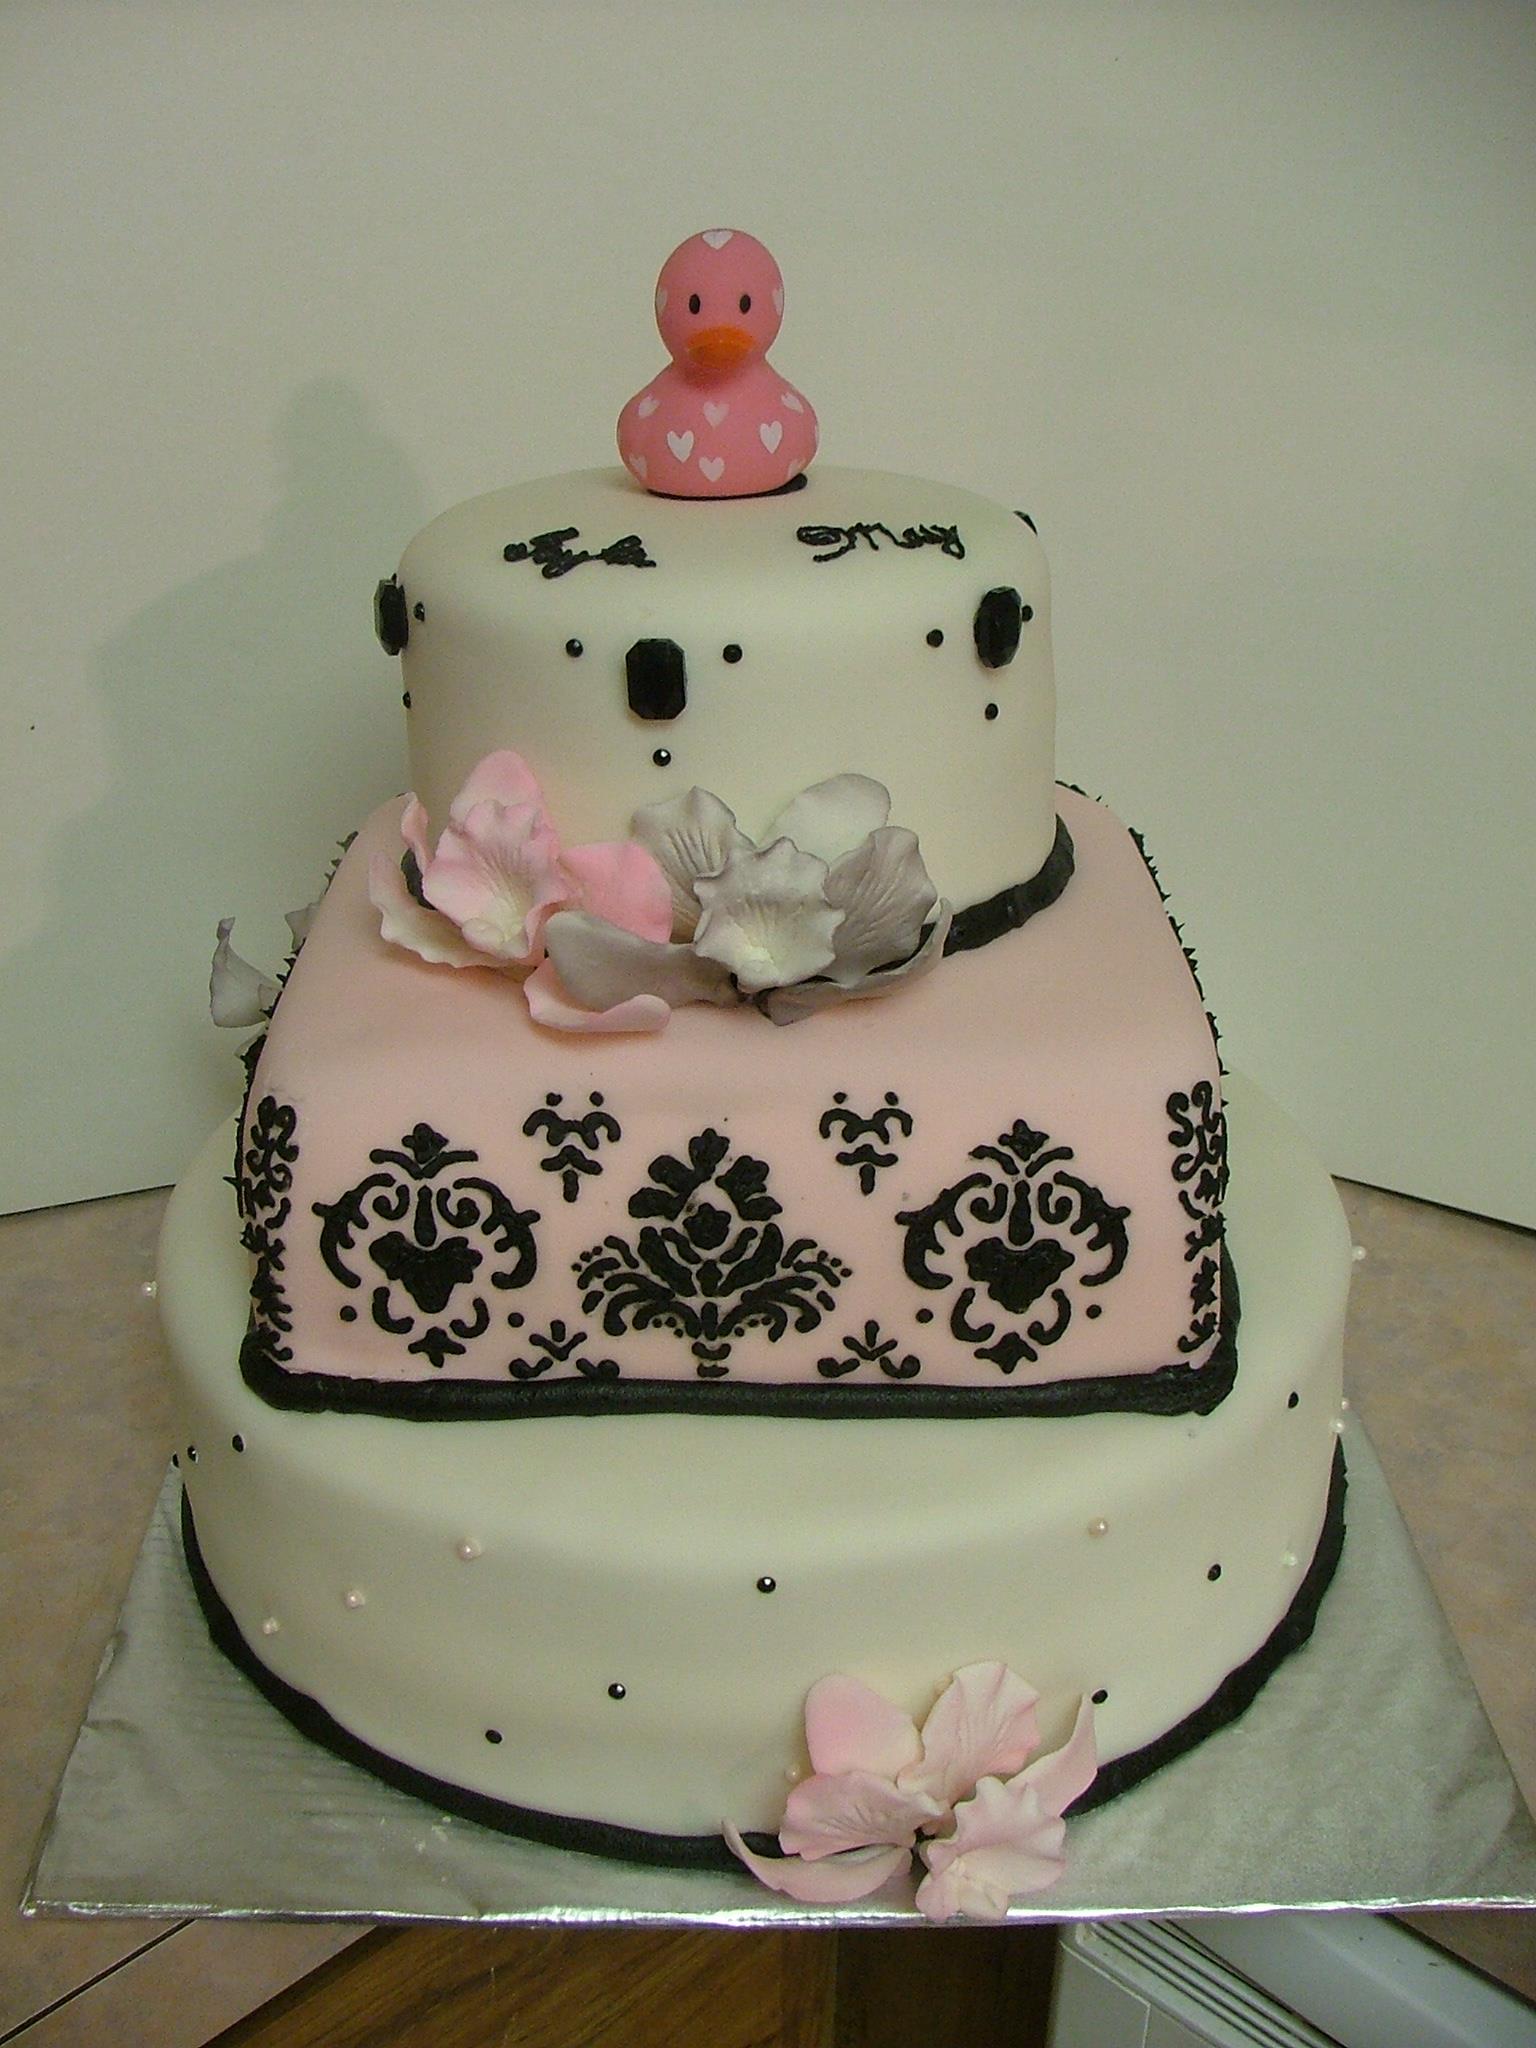 Krogers Baby Shower Cakes Picture. Kroger Birthday Cake Themes. View ...